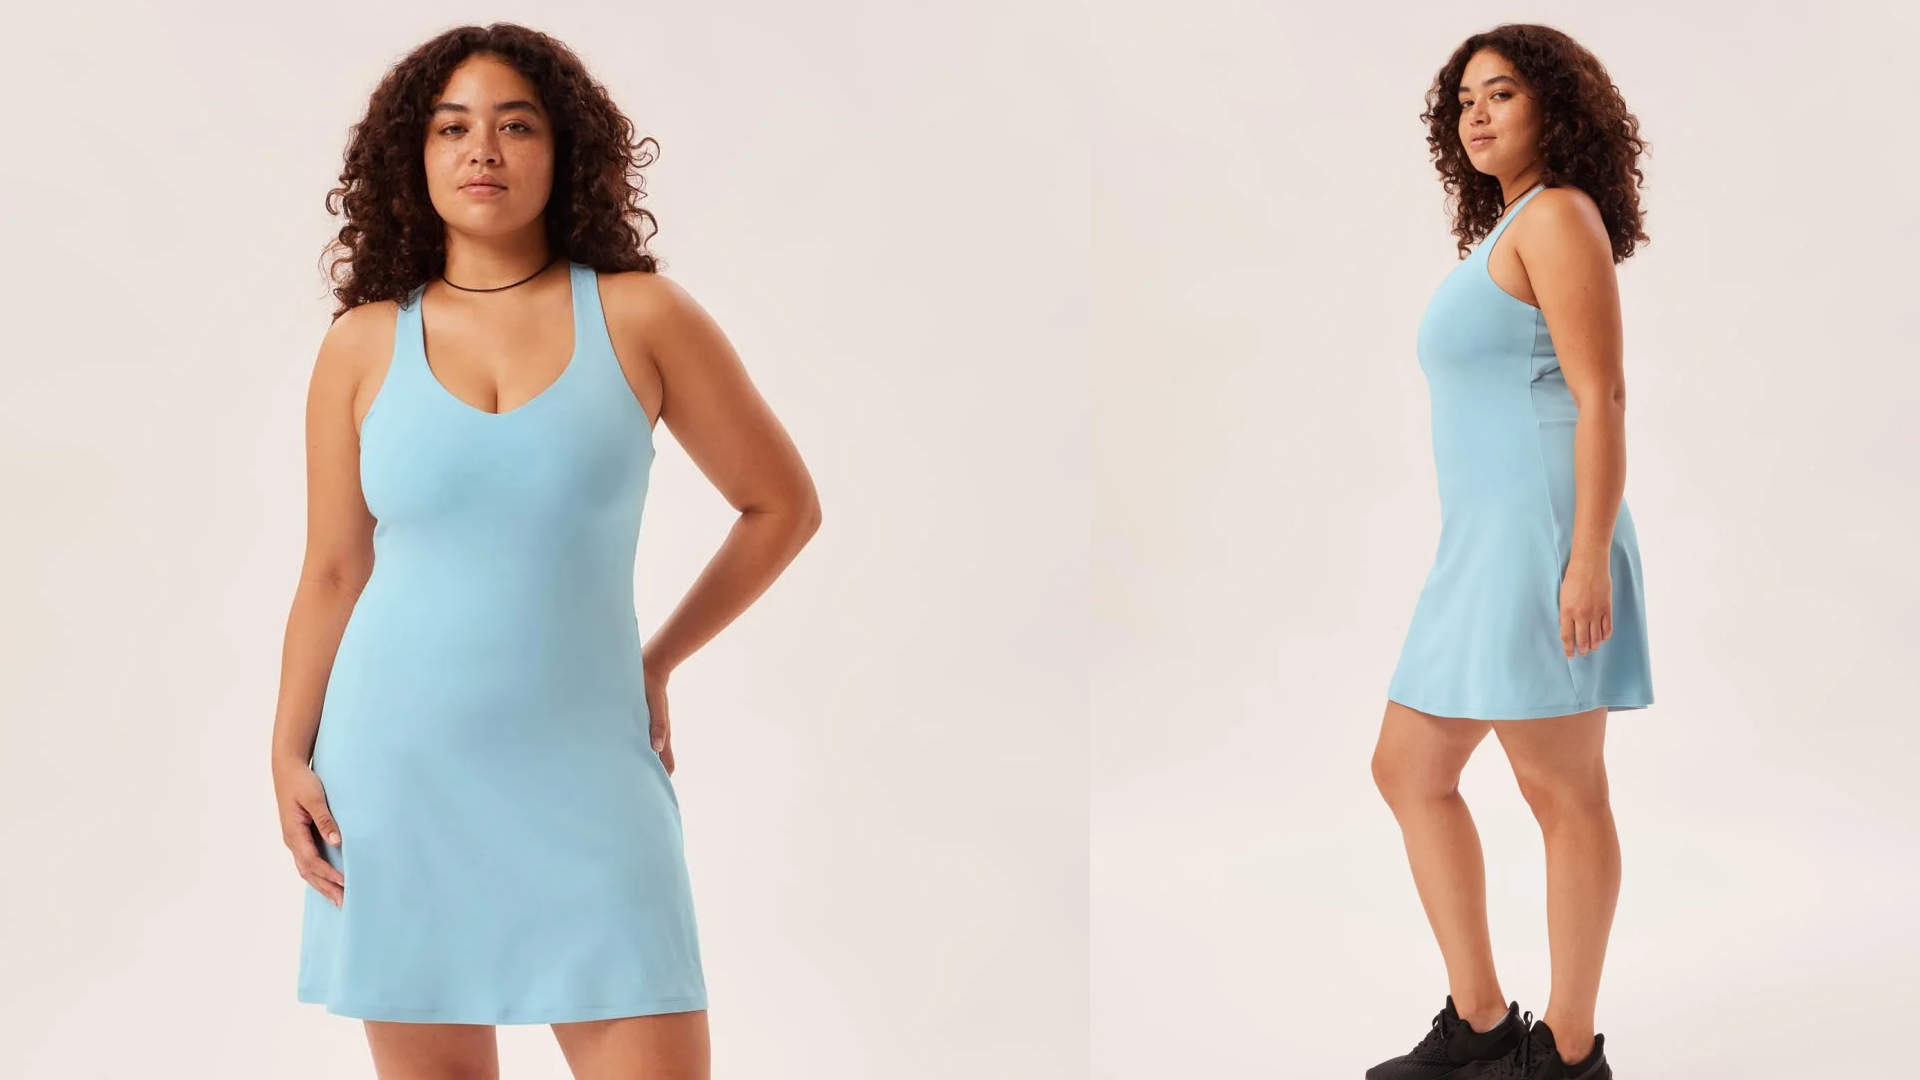 exercise dress with built-in bra 